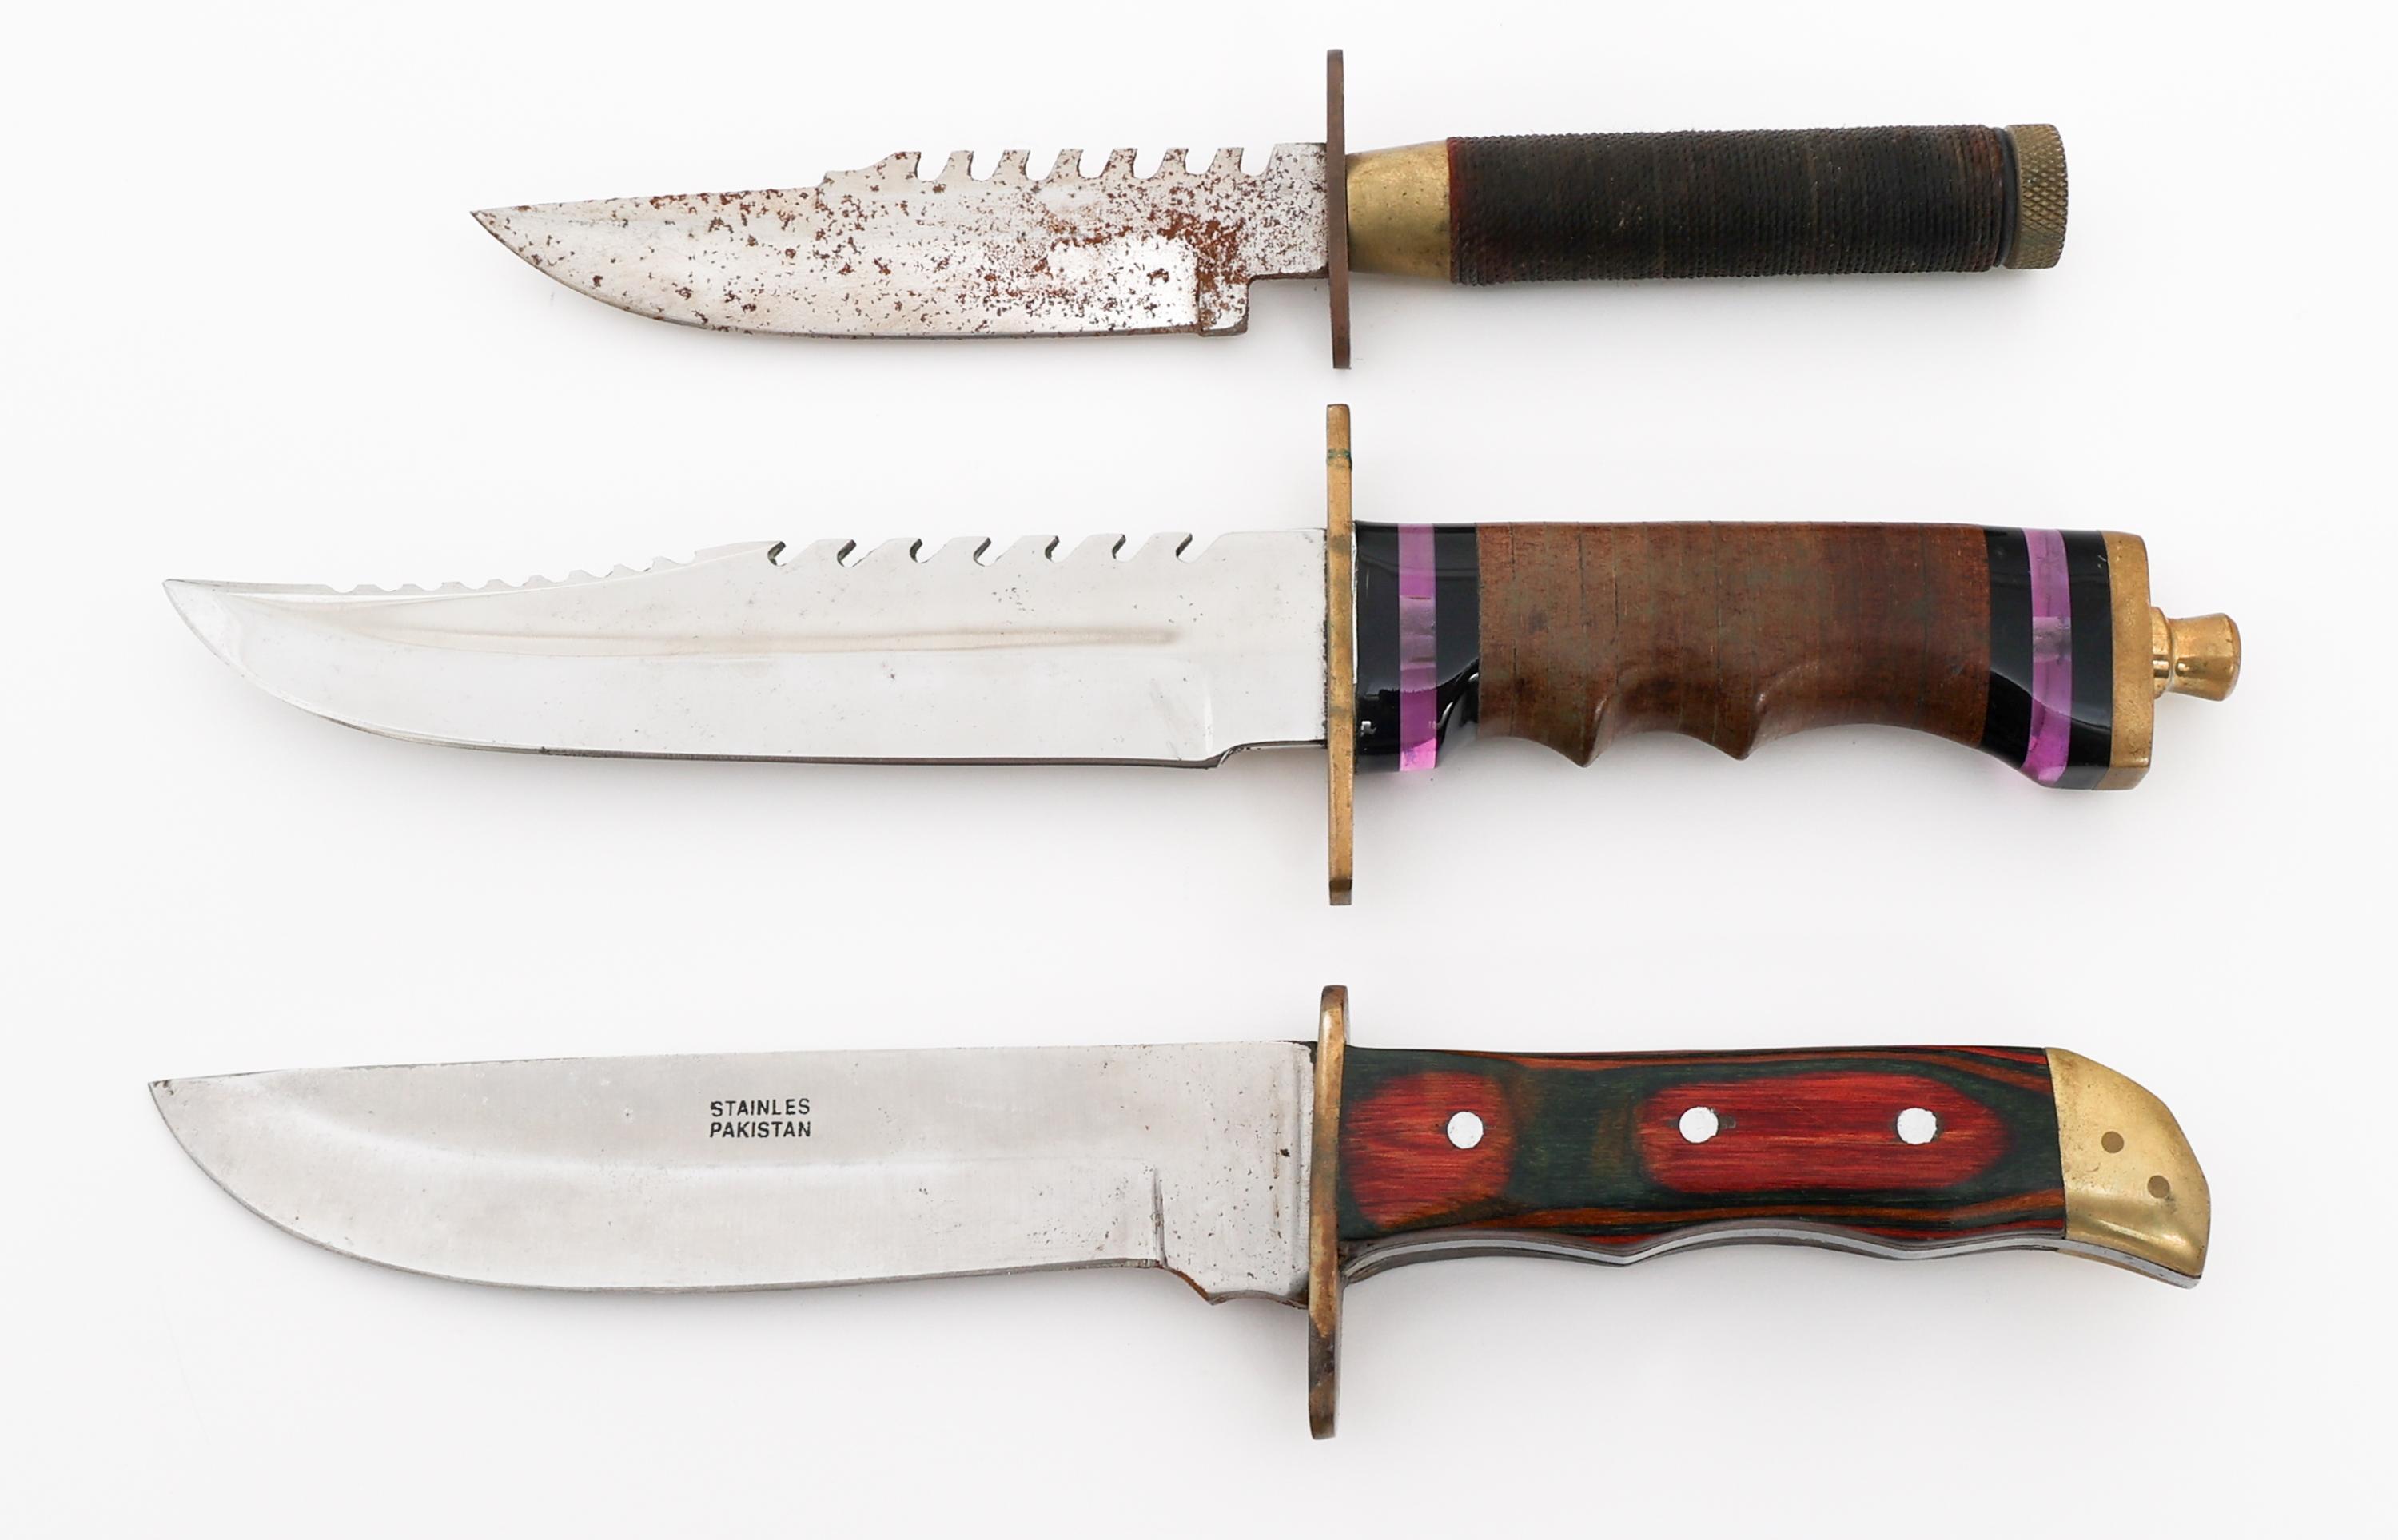 FIXED BLADE BOWIE & SURVIVAL KNIVES